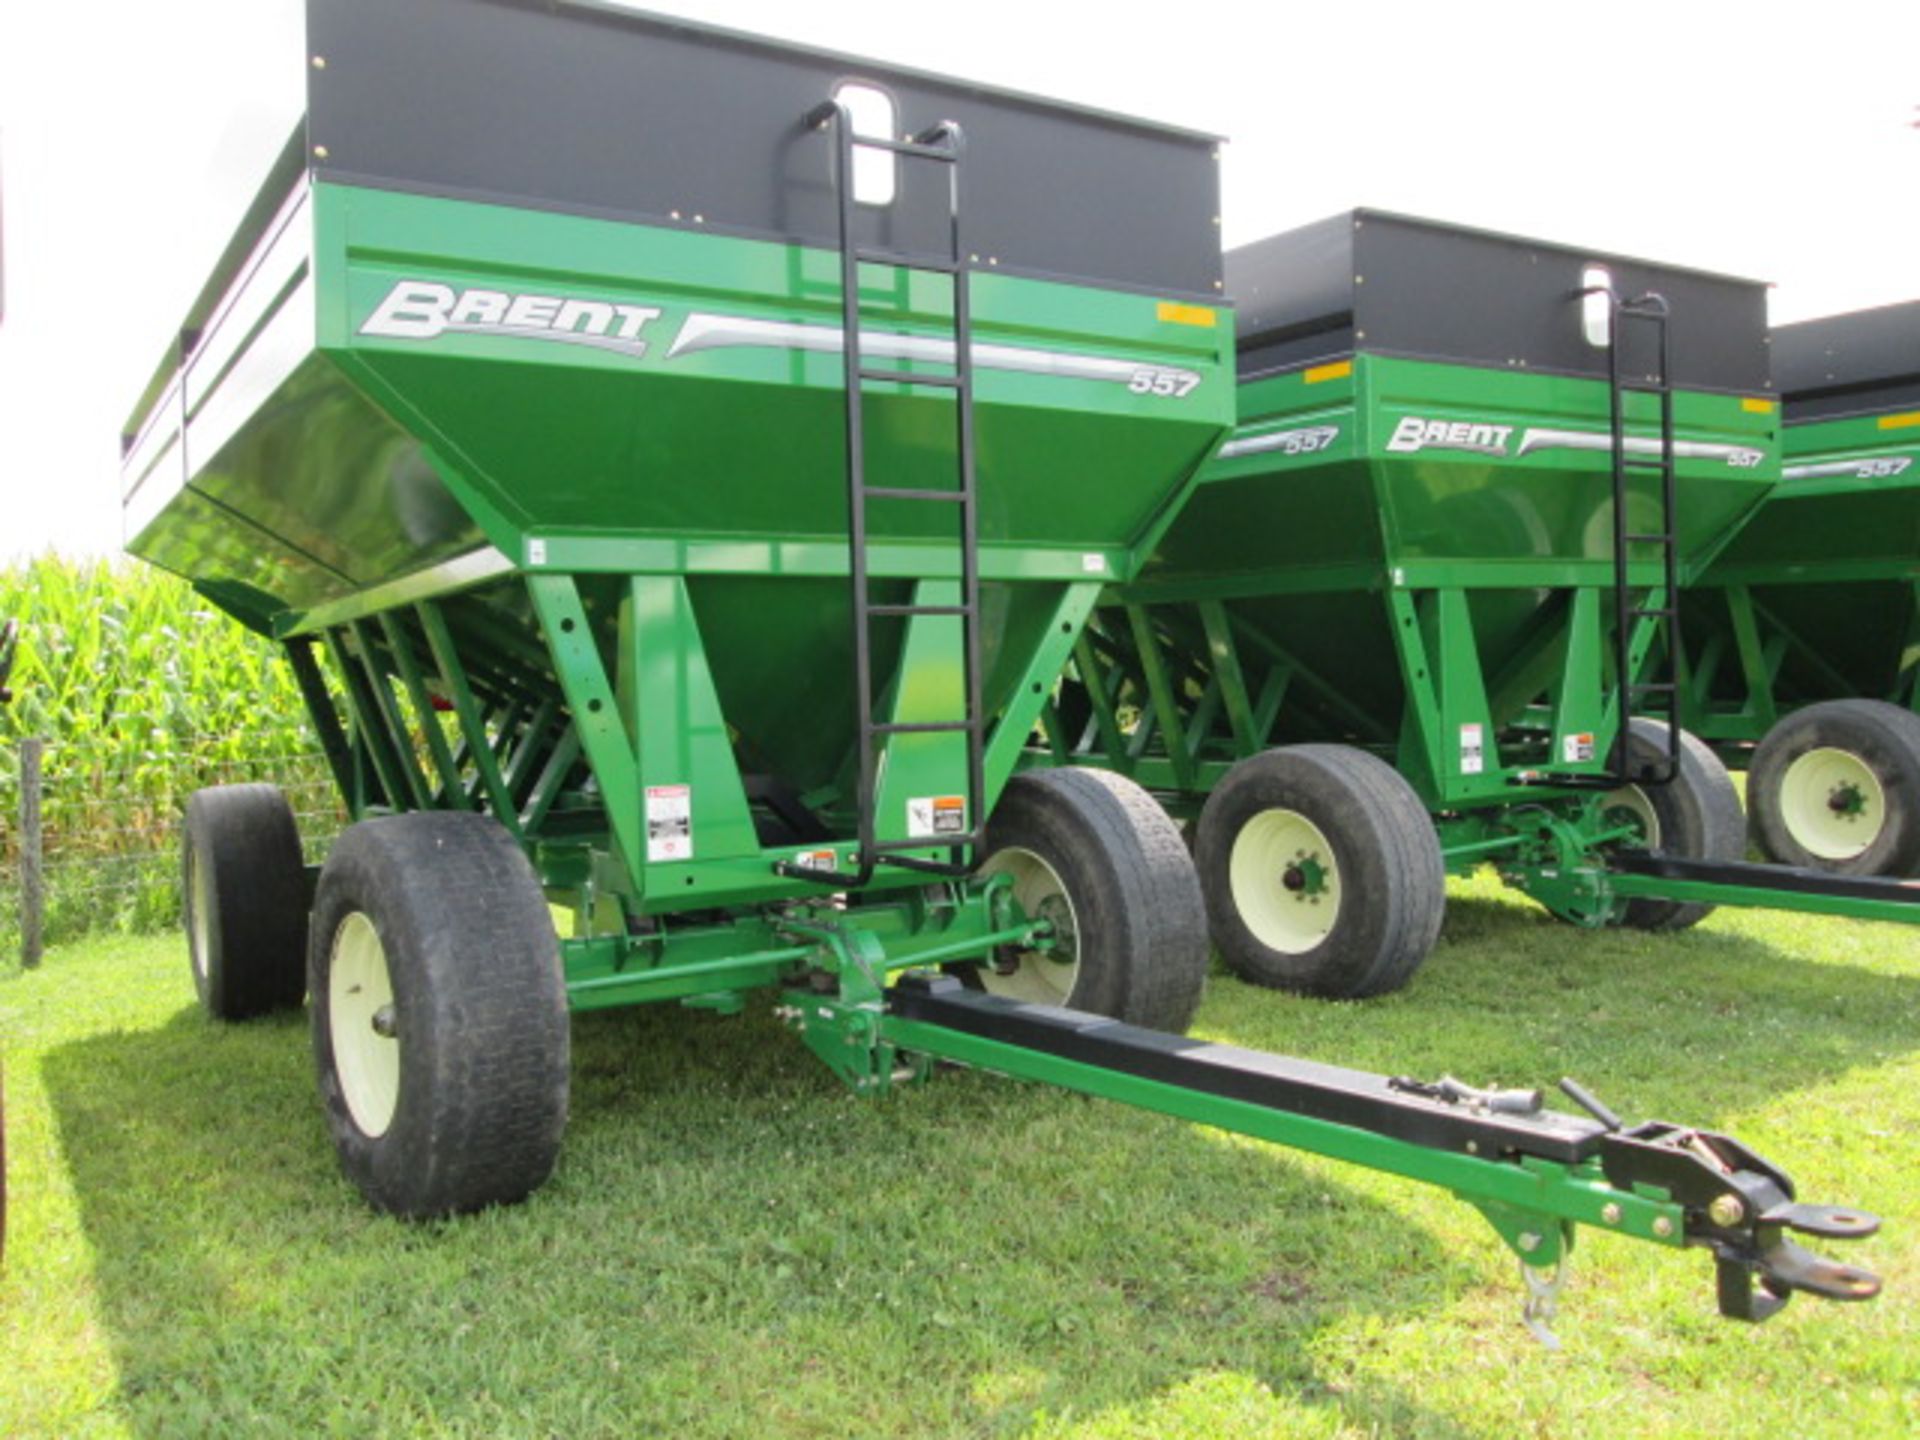 BRENT 557 GRAVITY FLOW WAGON - Image 2 of 11